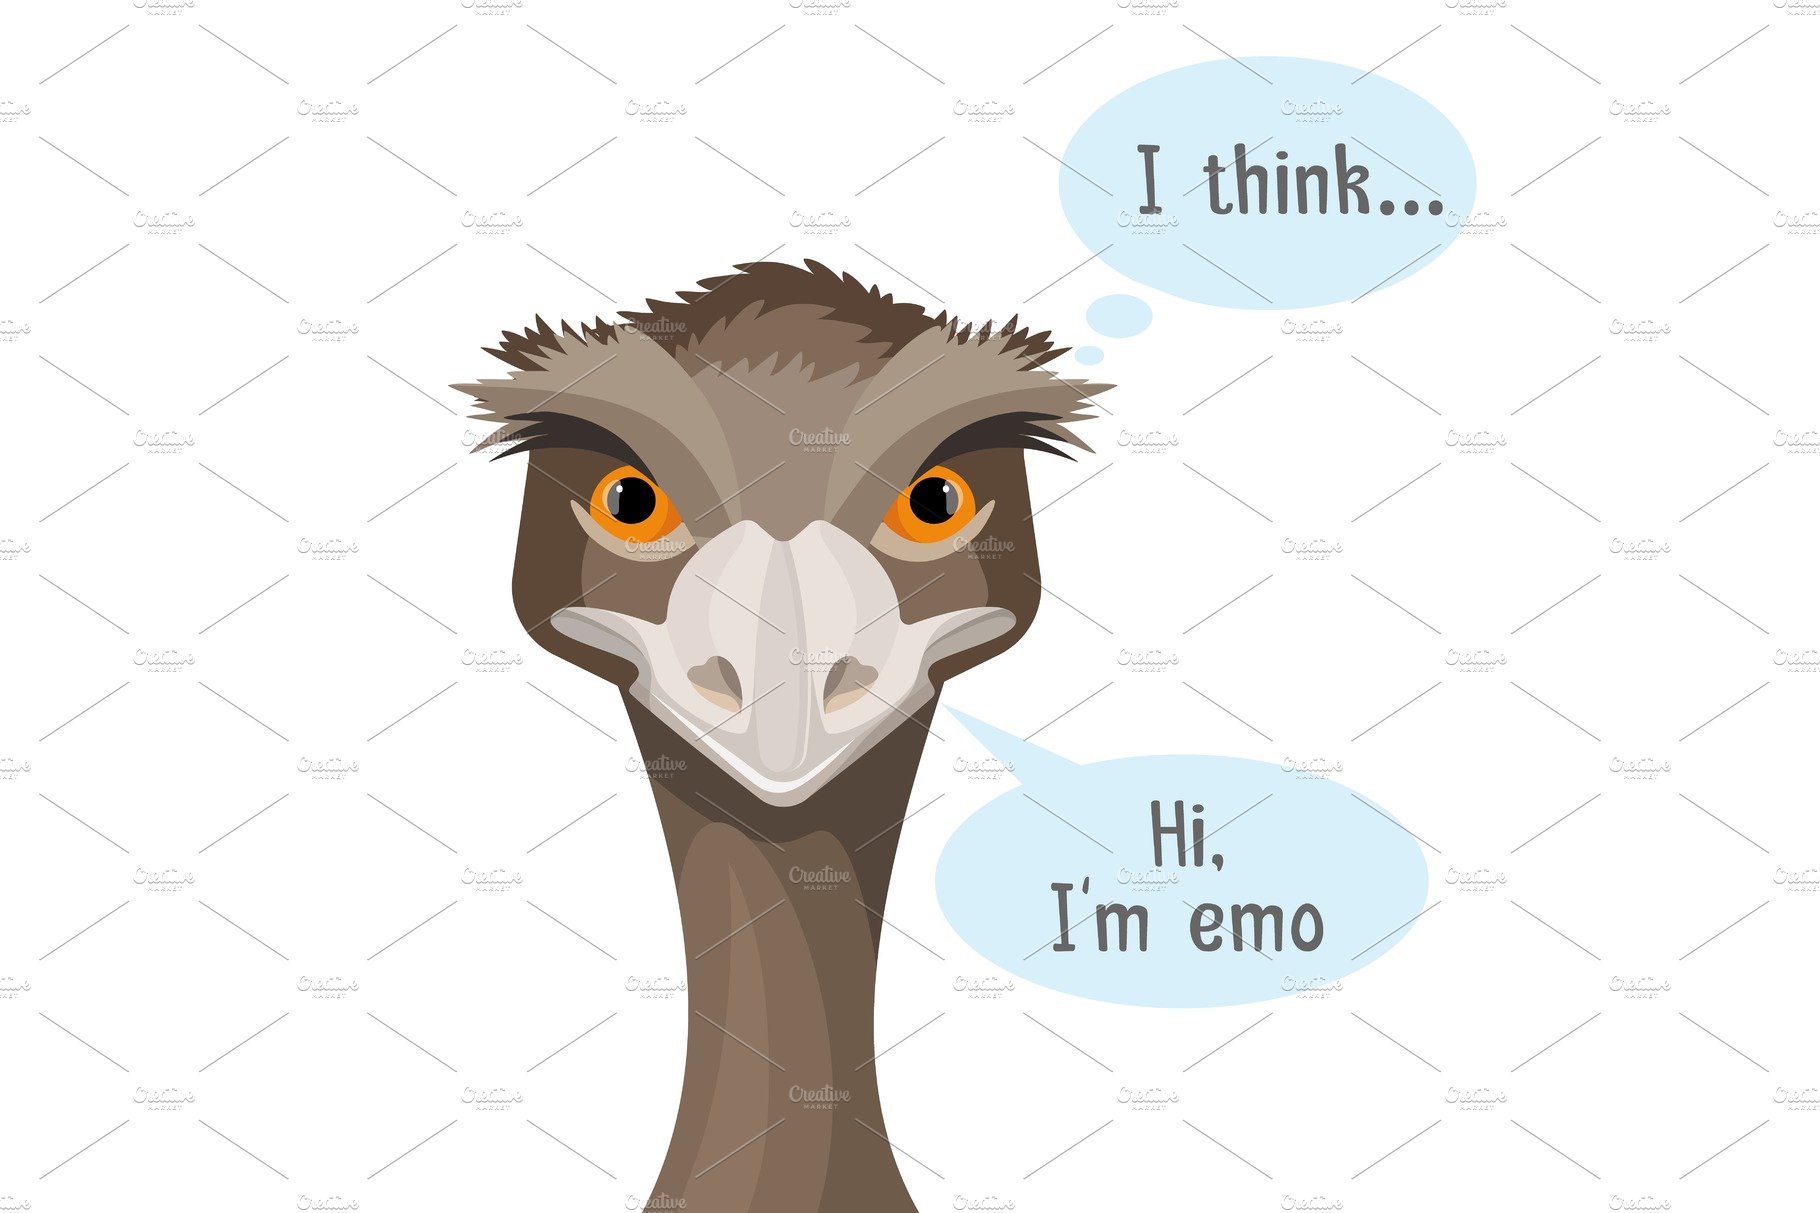 Emu isolated on white background with speech bubbles cover image.